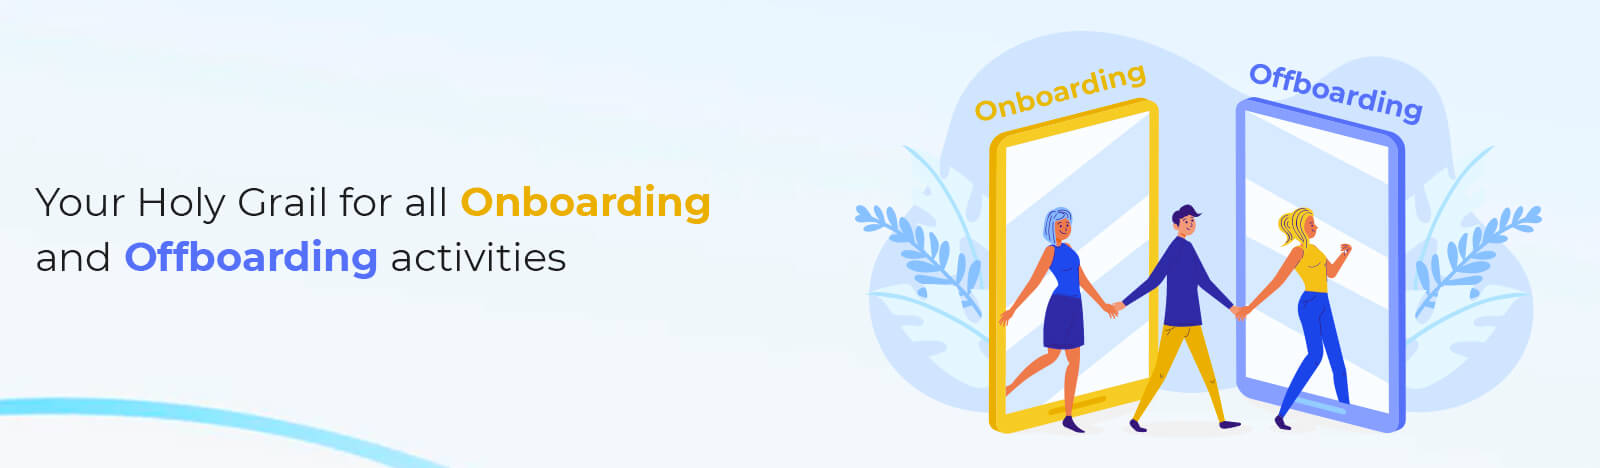 SharePoint: Your Holy Grail for all Onboarding and Offboarding activities